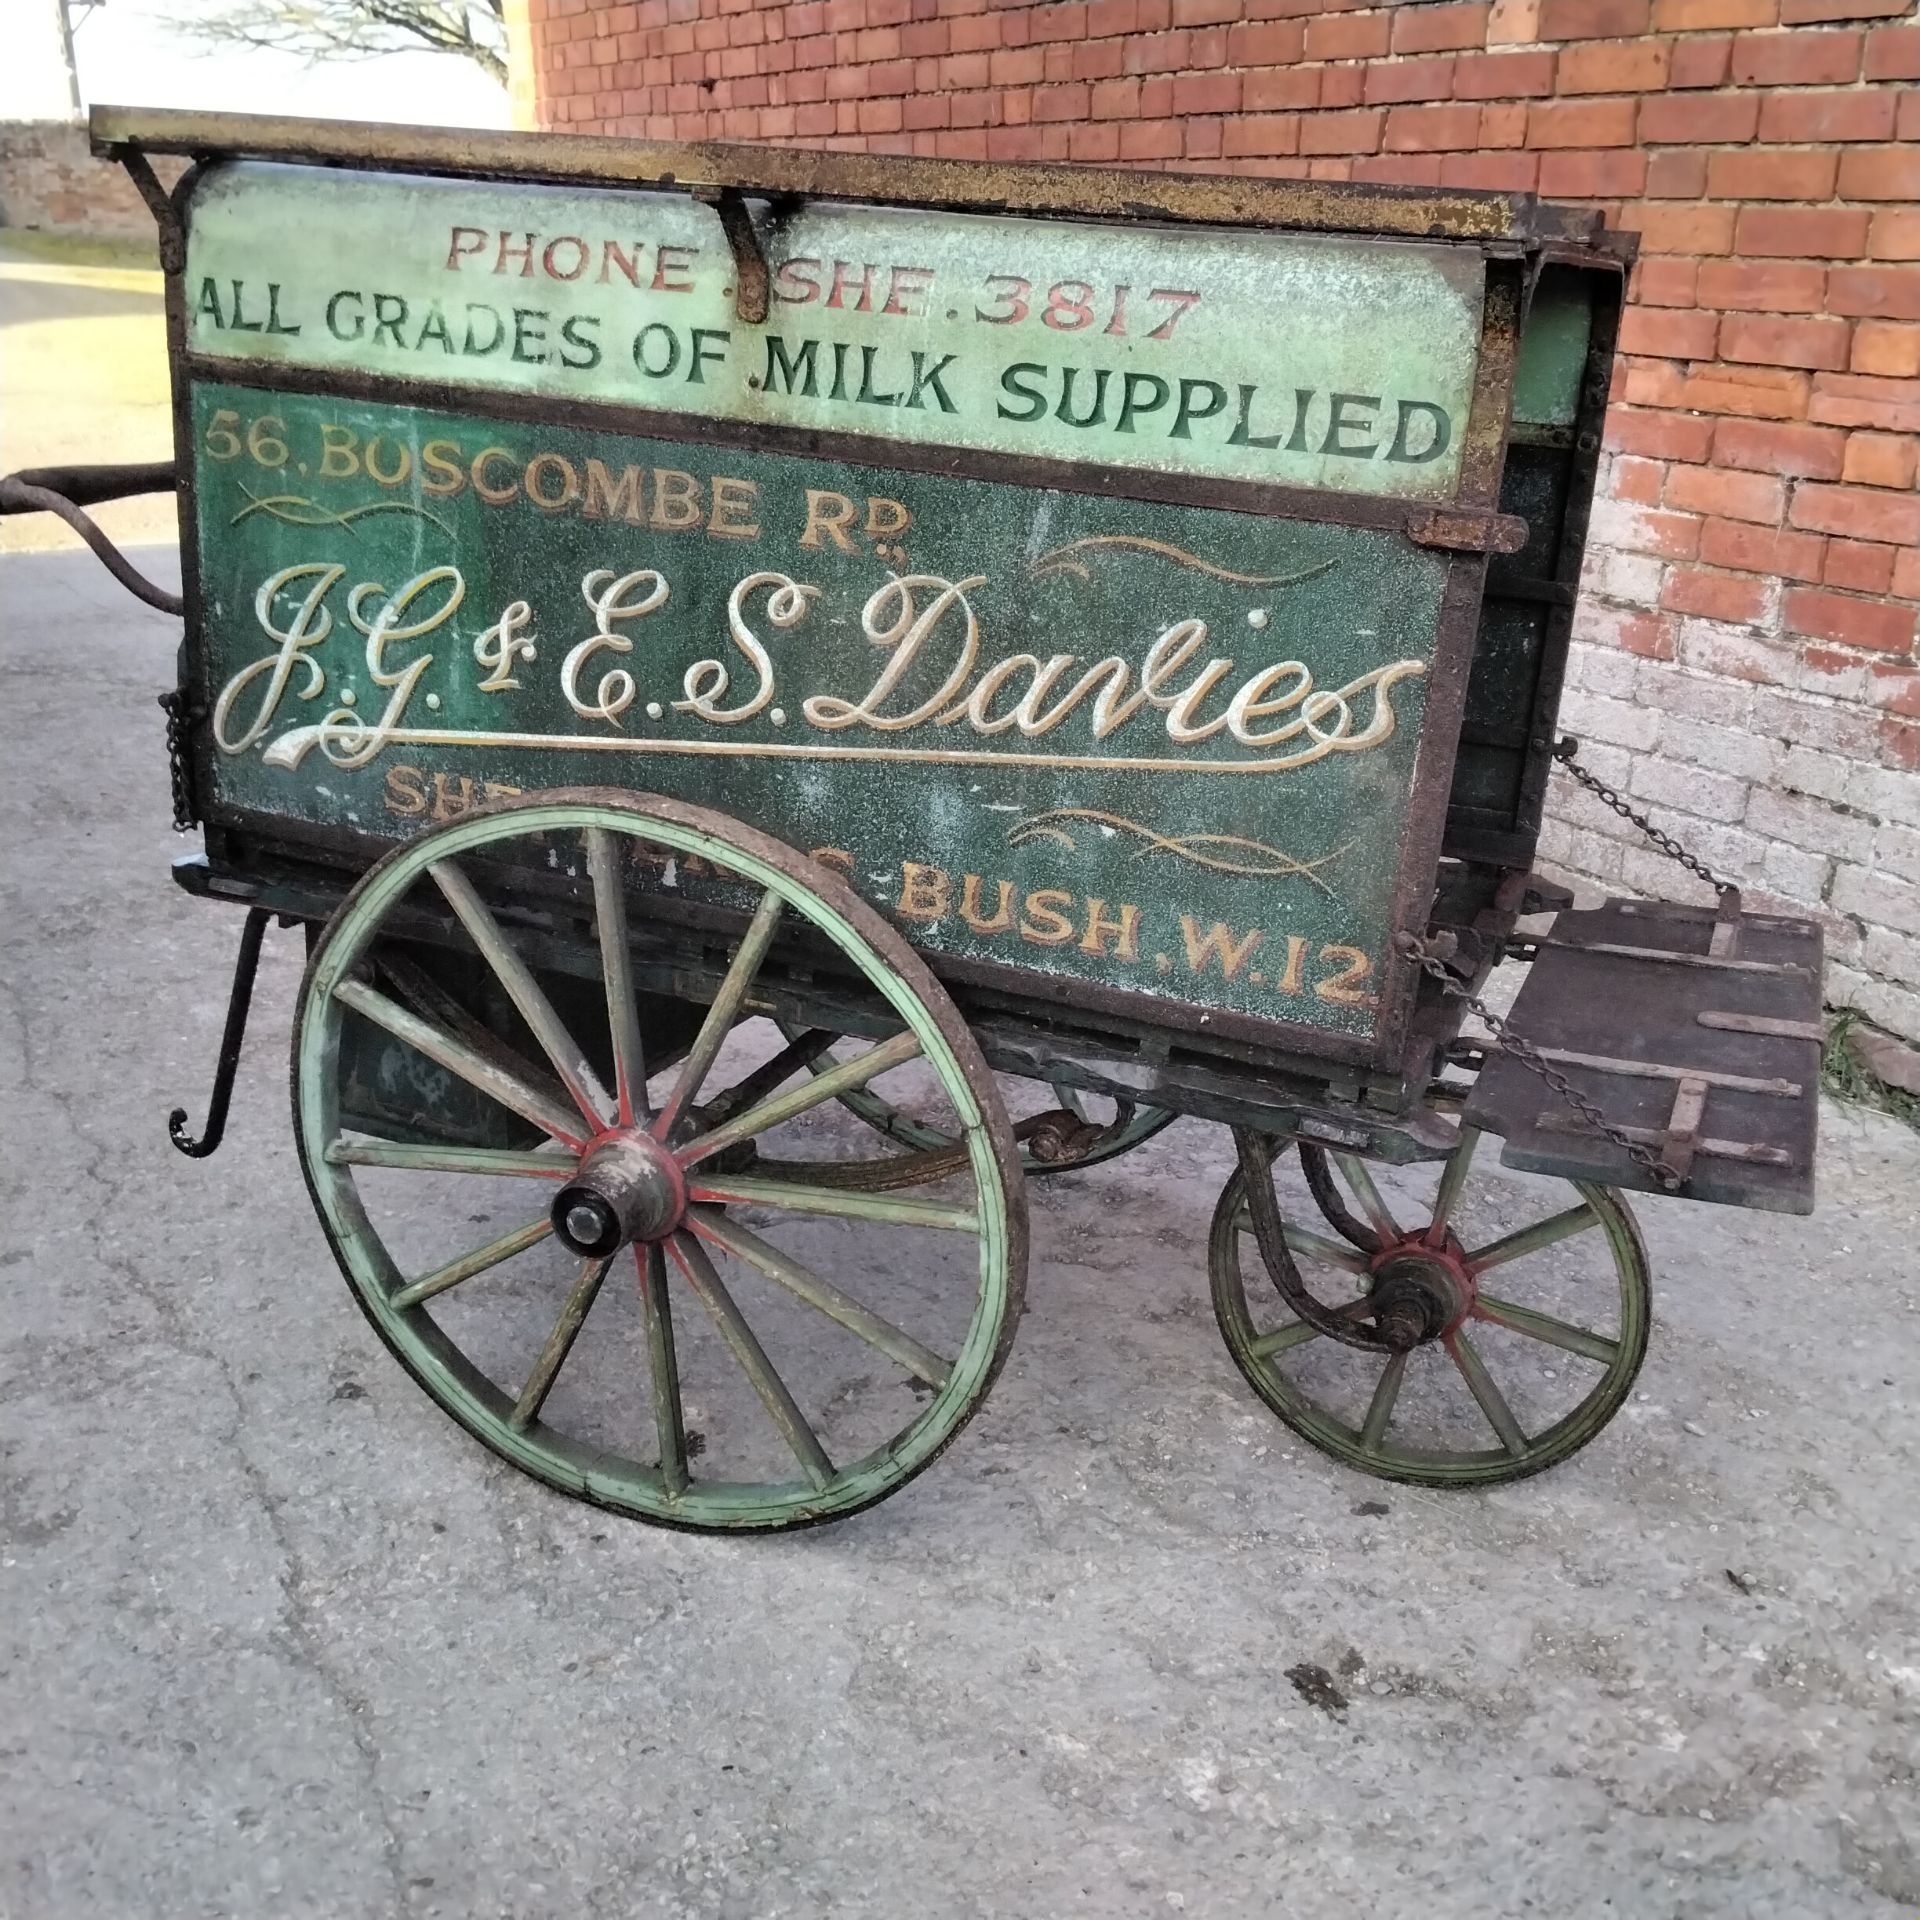 THREE WHEEL MILK DELIVERY HAND CART - Image 2 of 3